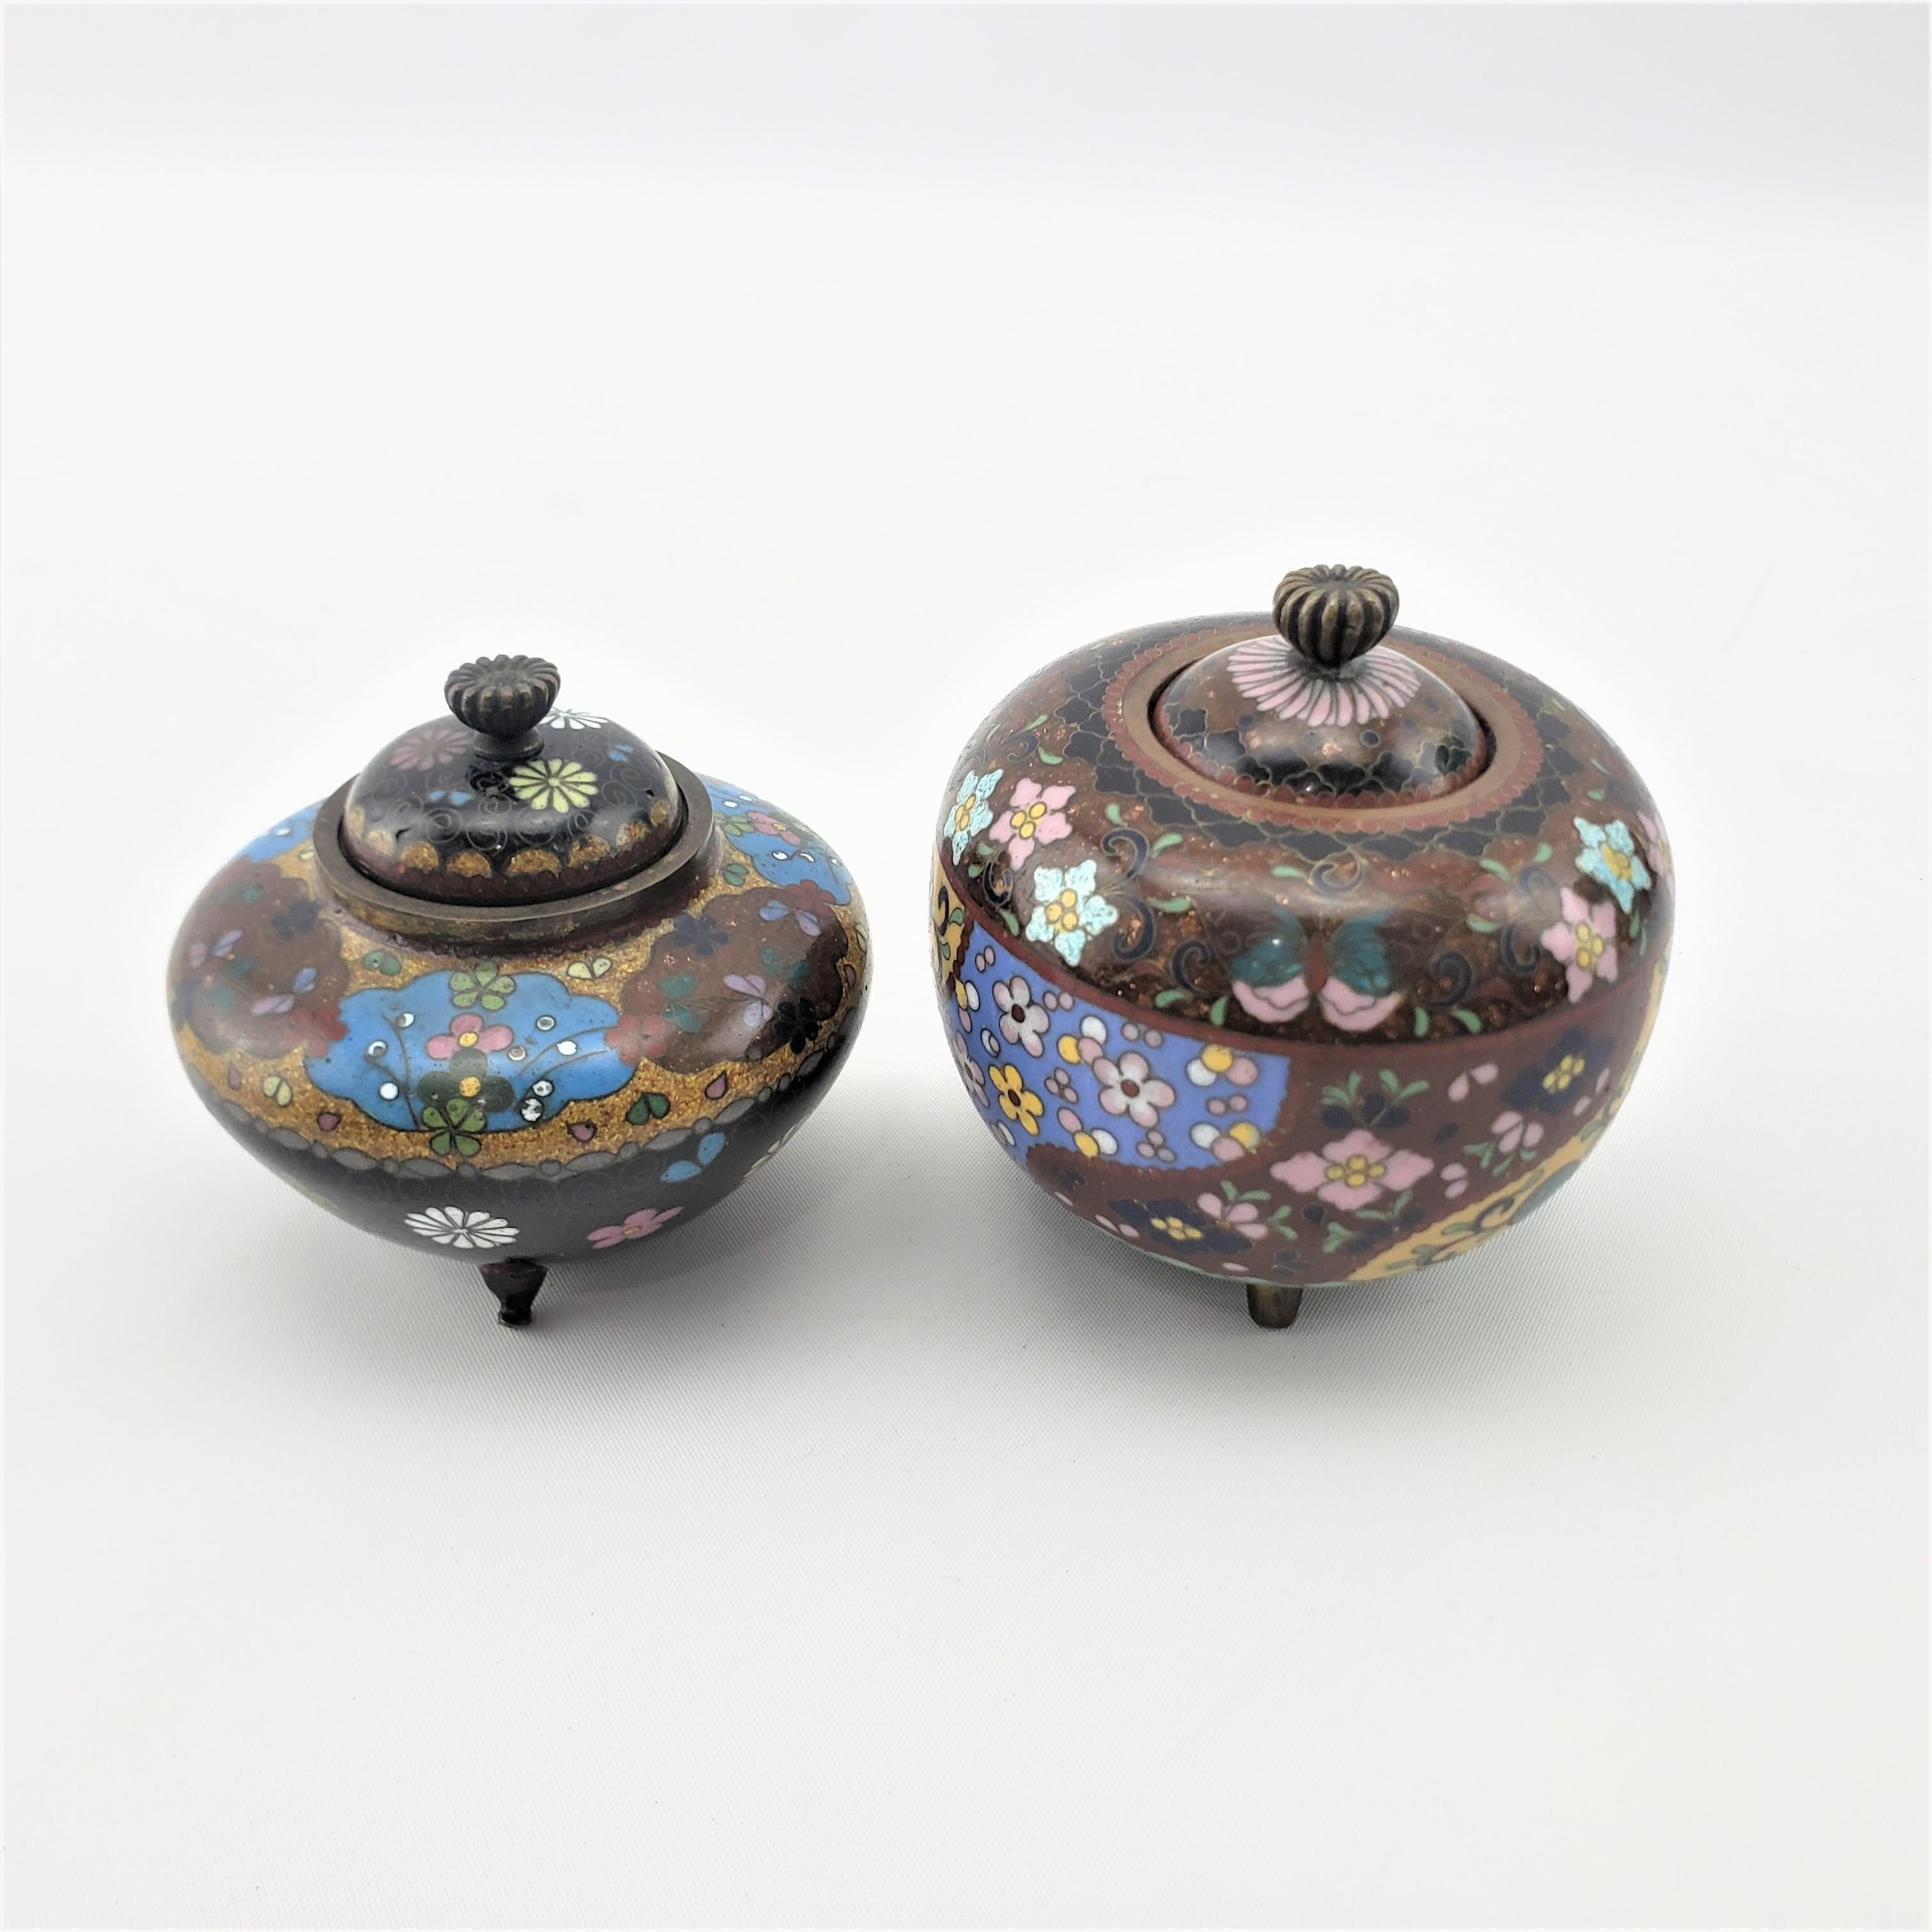 Pair of Antique Japanese Cloisonne Covered Jars with Floral Motif Decoration In Good Condition For Sale In Hamilton, Ontario